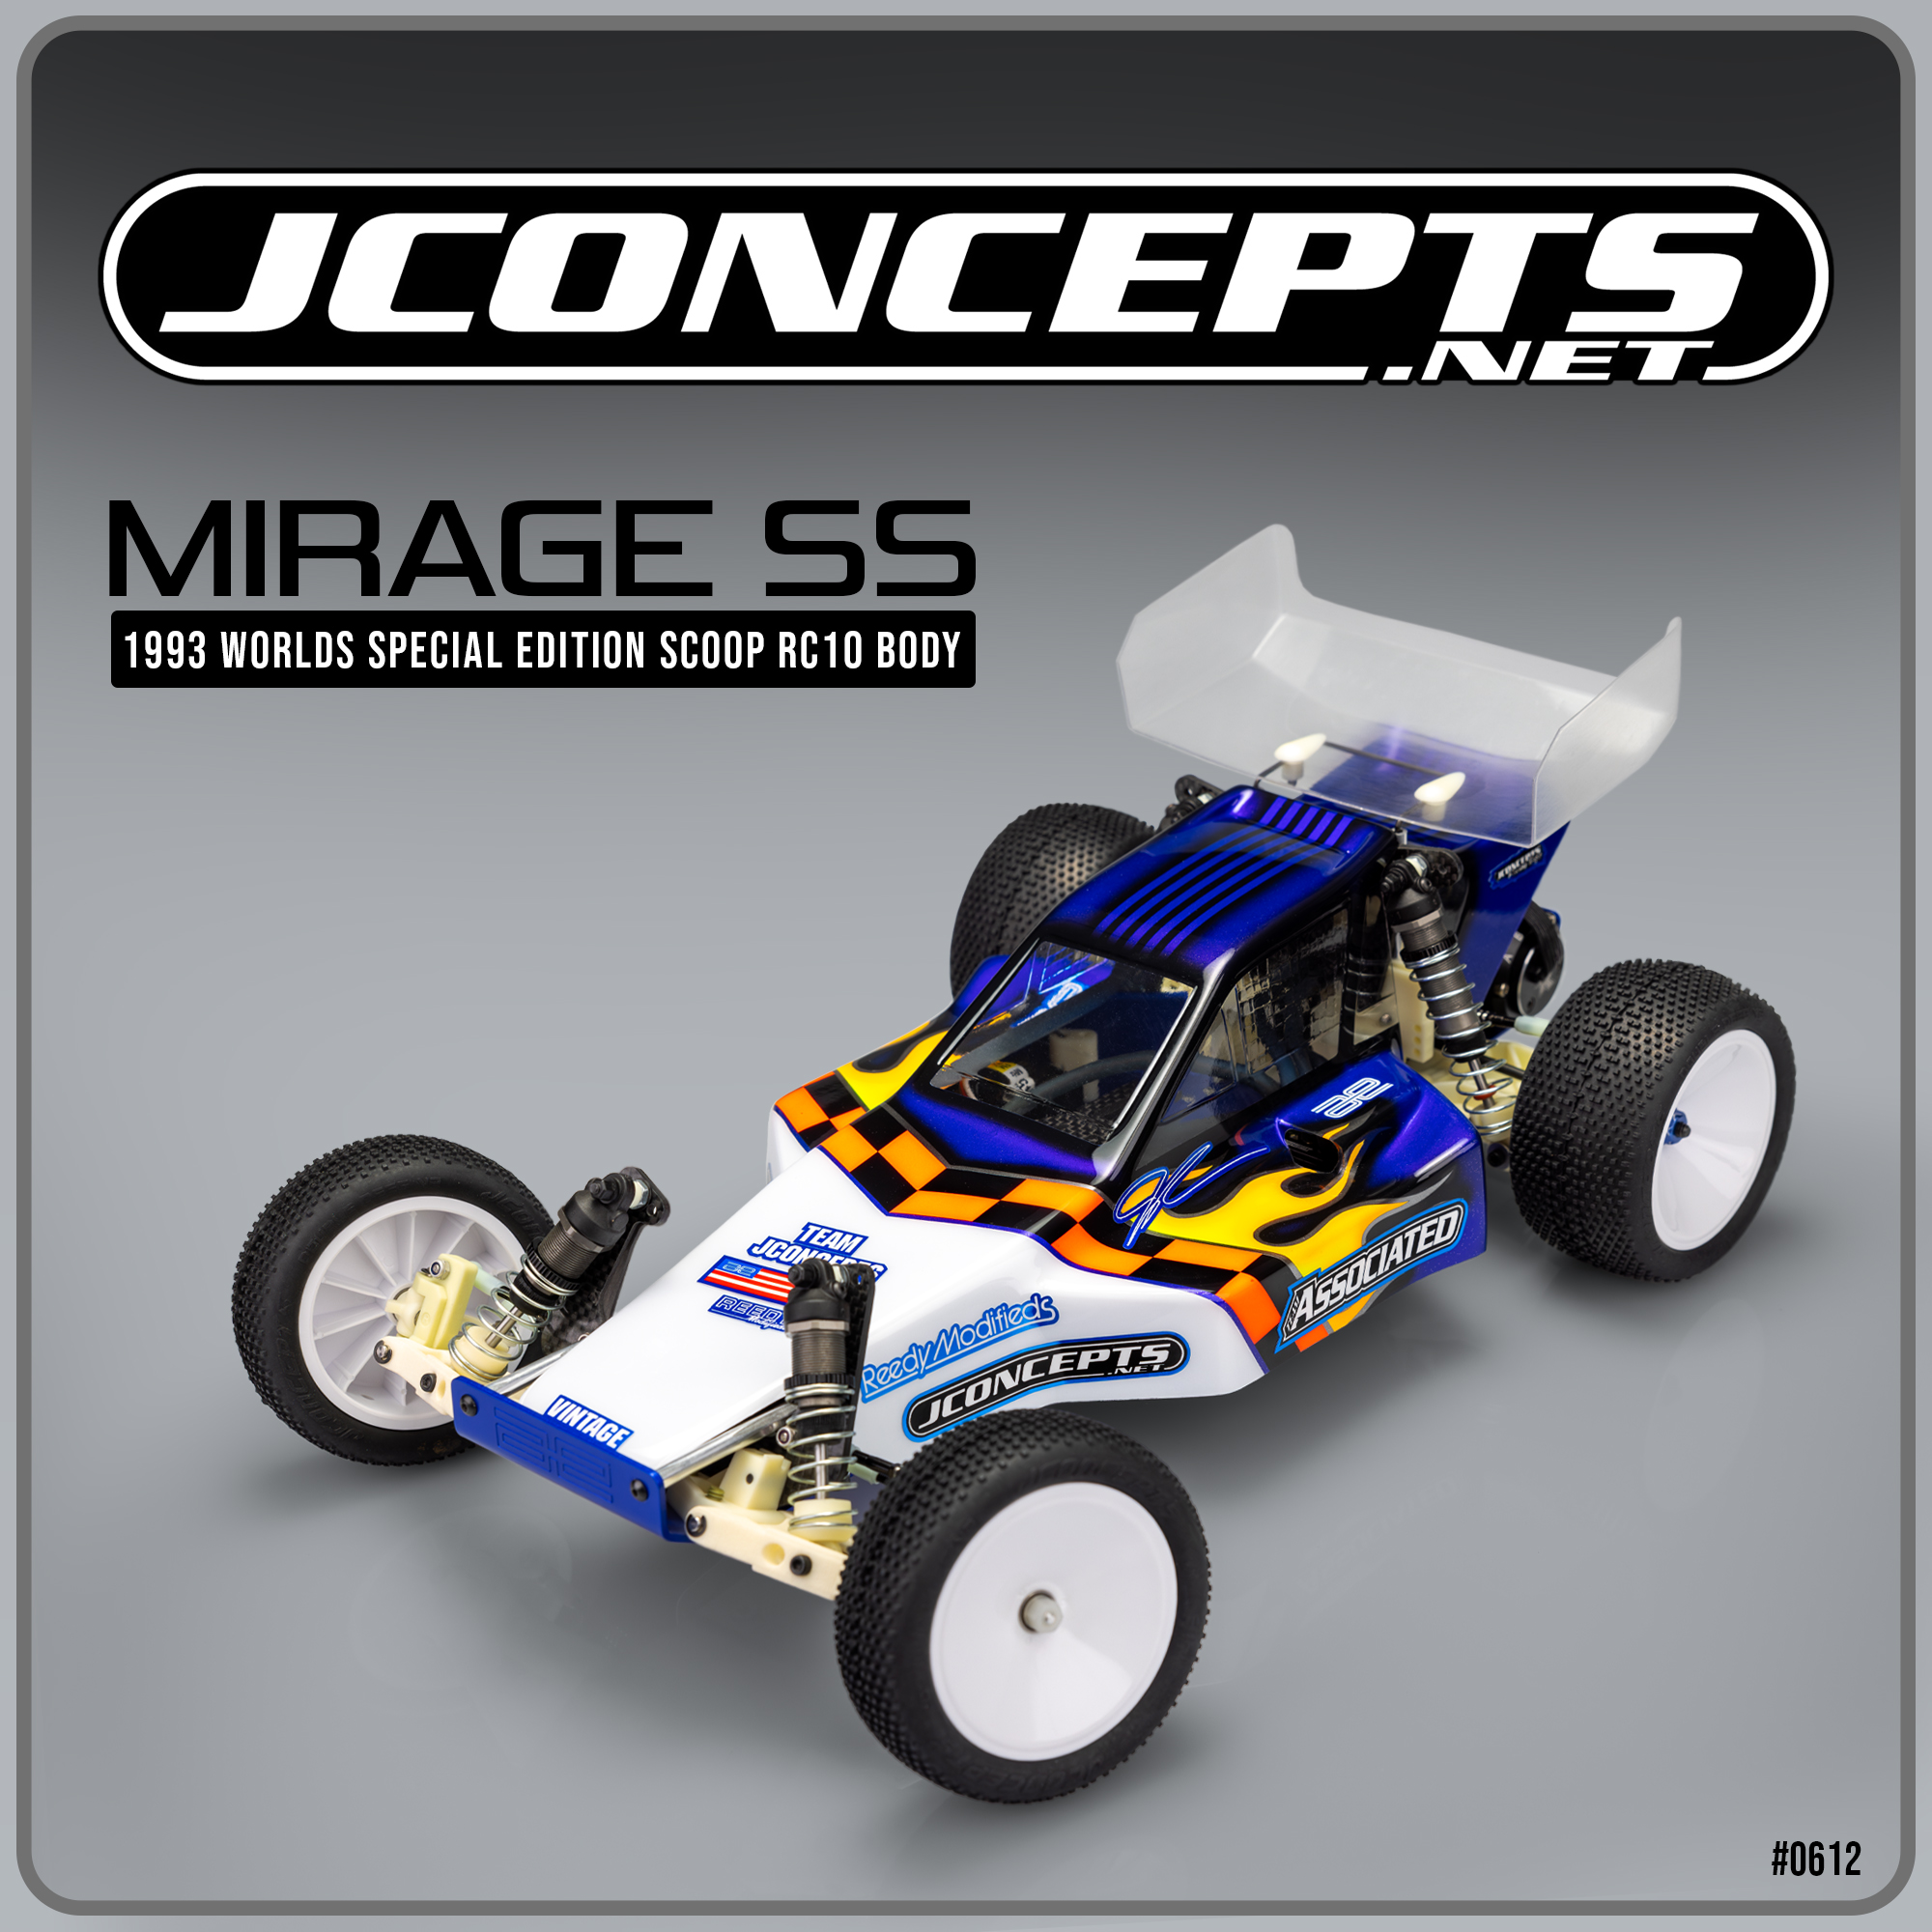 JConcepts New Release – Mirage WSE SS, 1993 Worlds Special Edition Scoop  RC10 Body – JConcepts Blog